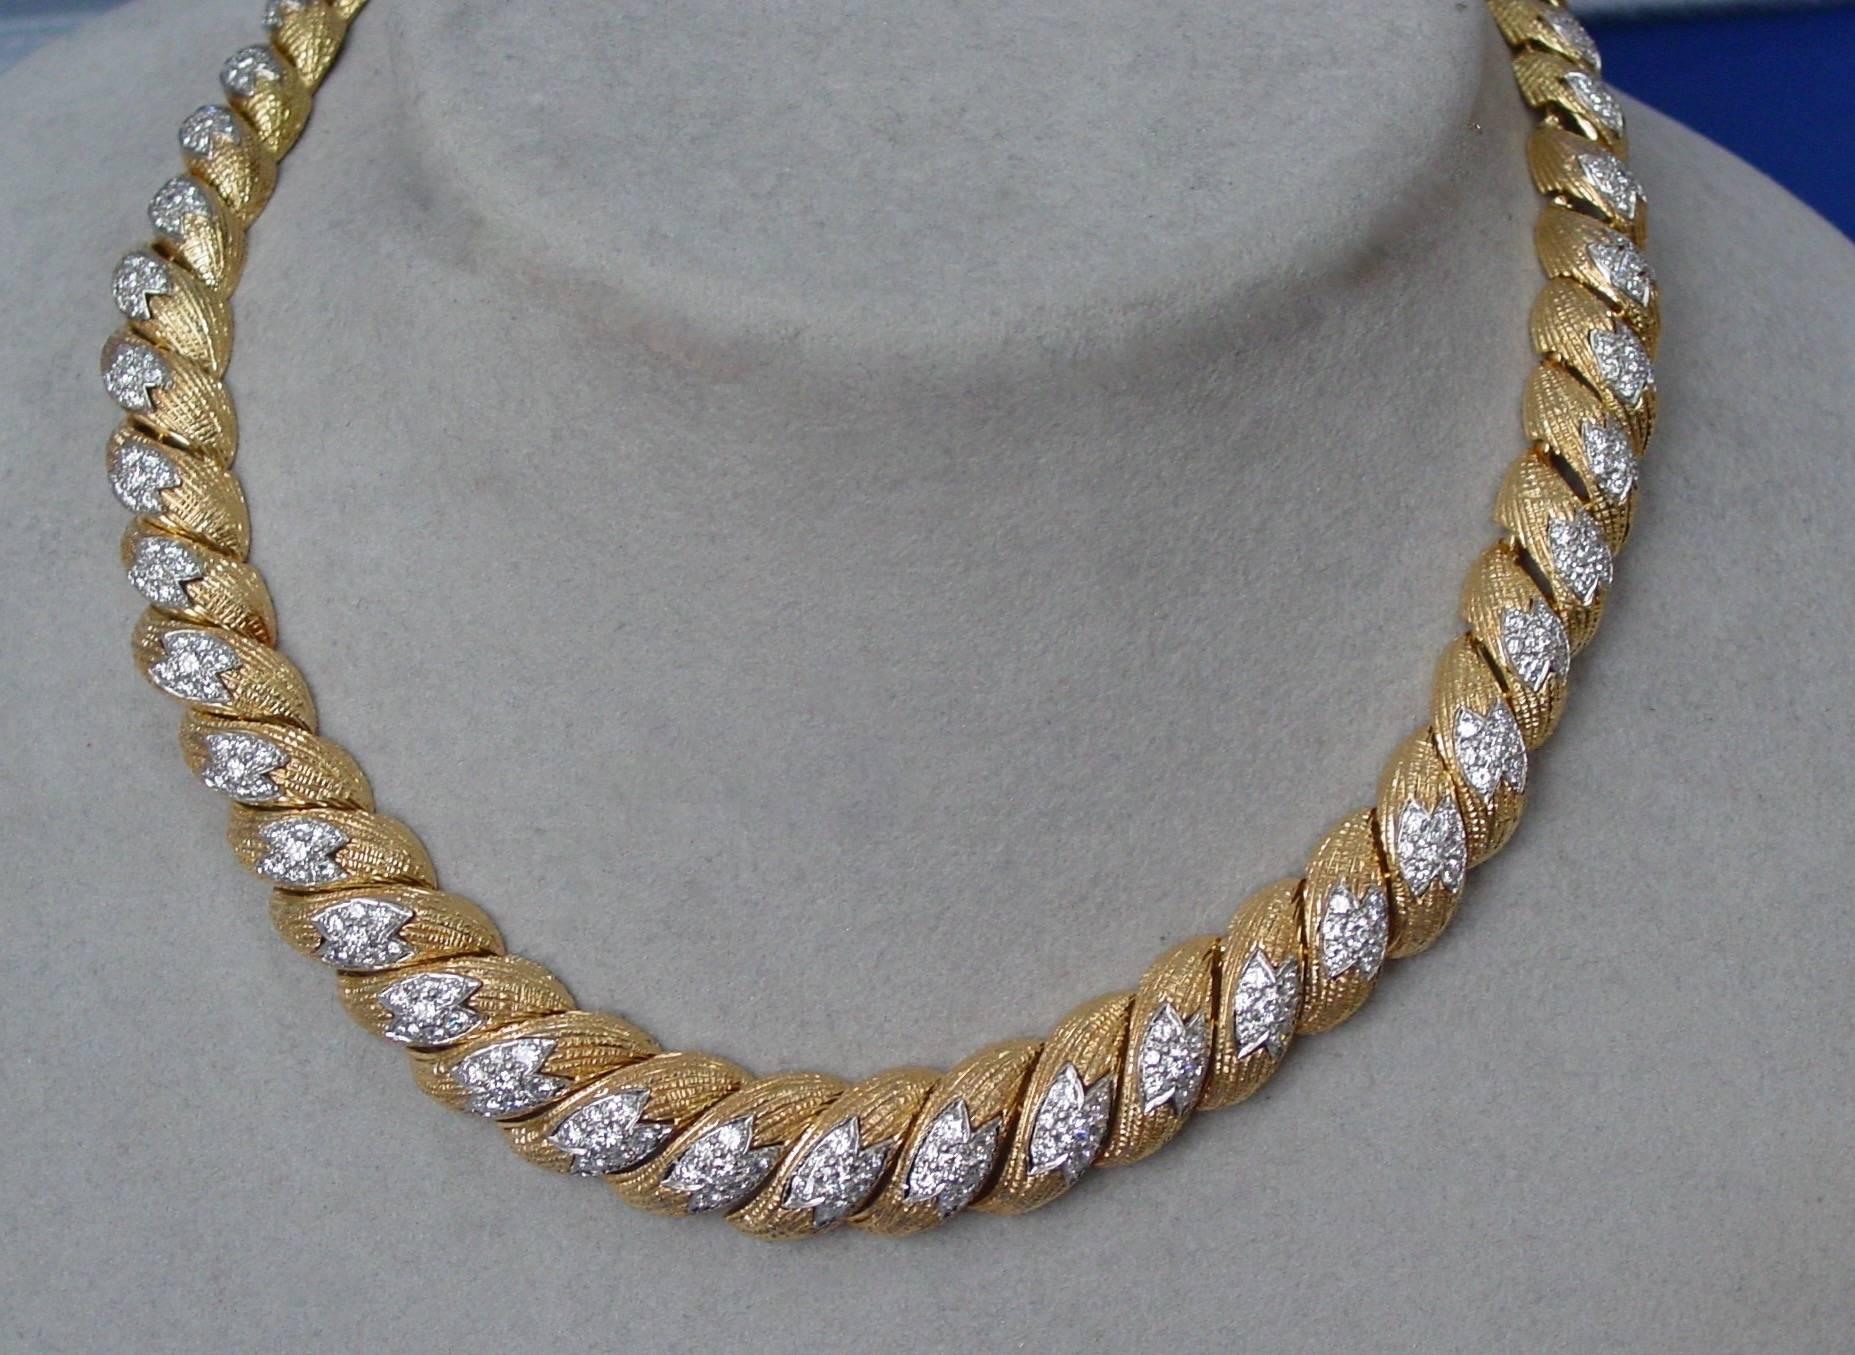 A stylish and very wearable 18 karat yellow and white gold diamond 16 inch necklace. Composed of textured gold links featuring centers of round diamonds mounted in white gold this necklace tapers from 13.75mm to 10.95 mm. Total carat weight is